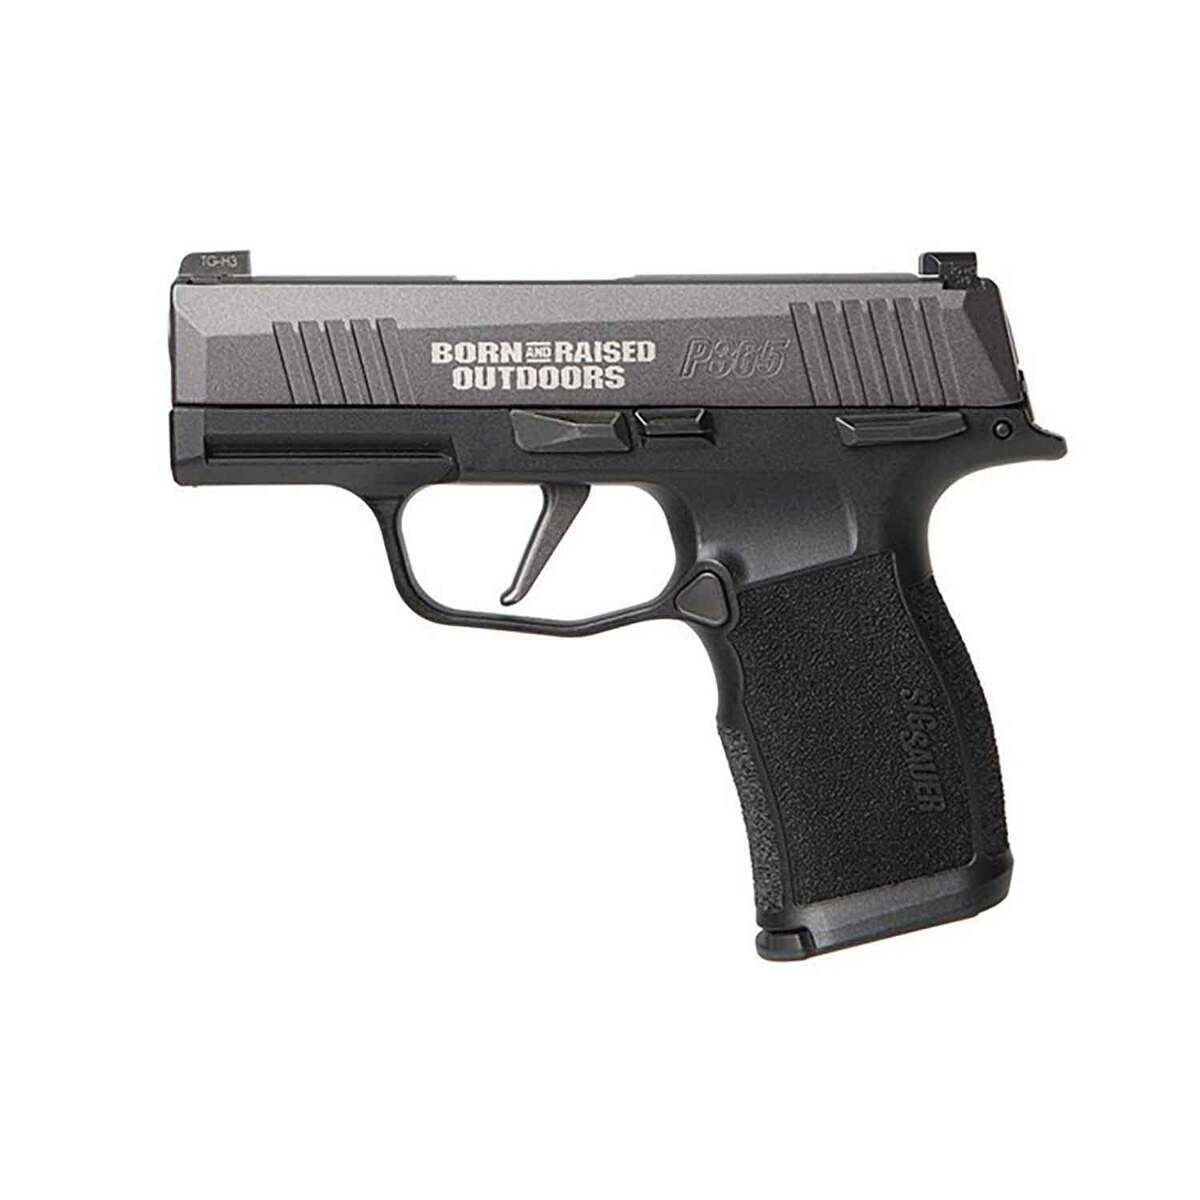 sig sauer p365x born raised 9mm lugger 31in elite carbon gray pistol 121 rounds 1790501 1 1